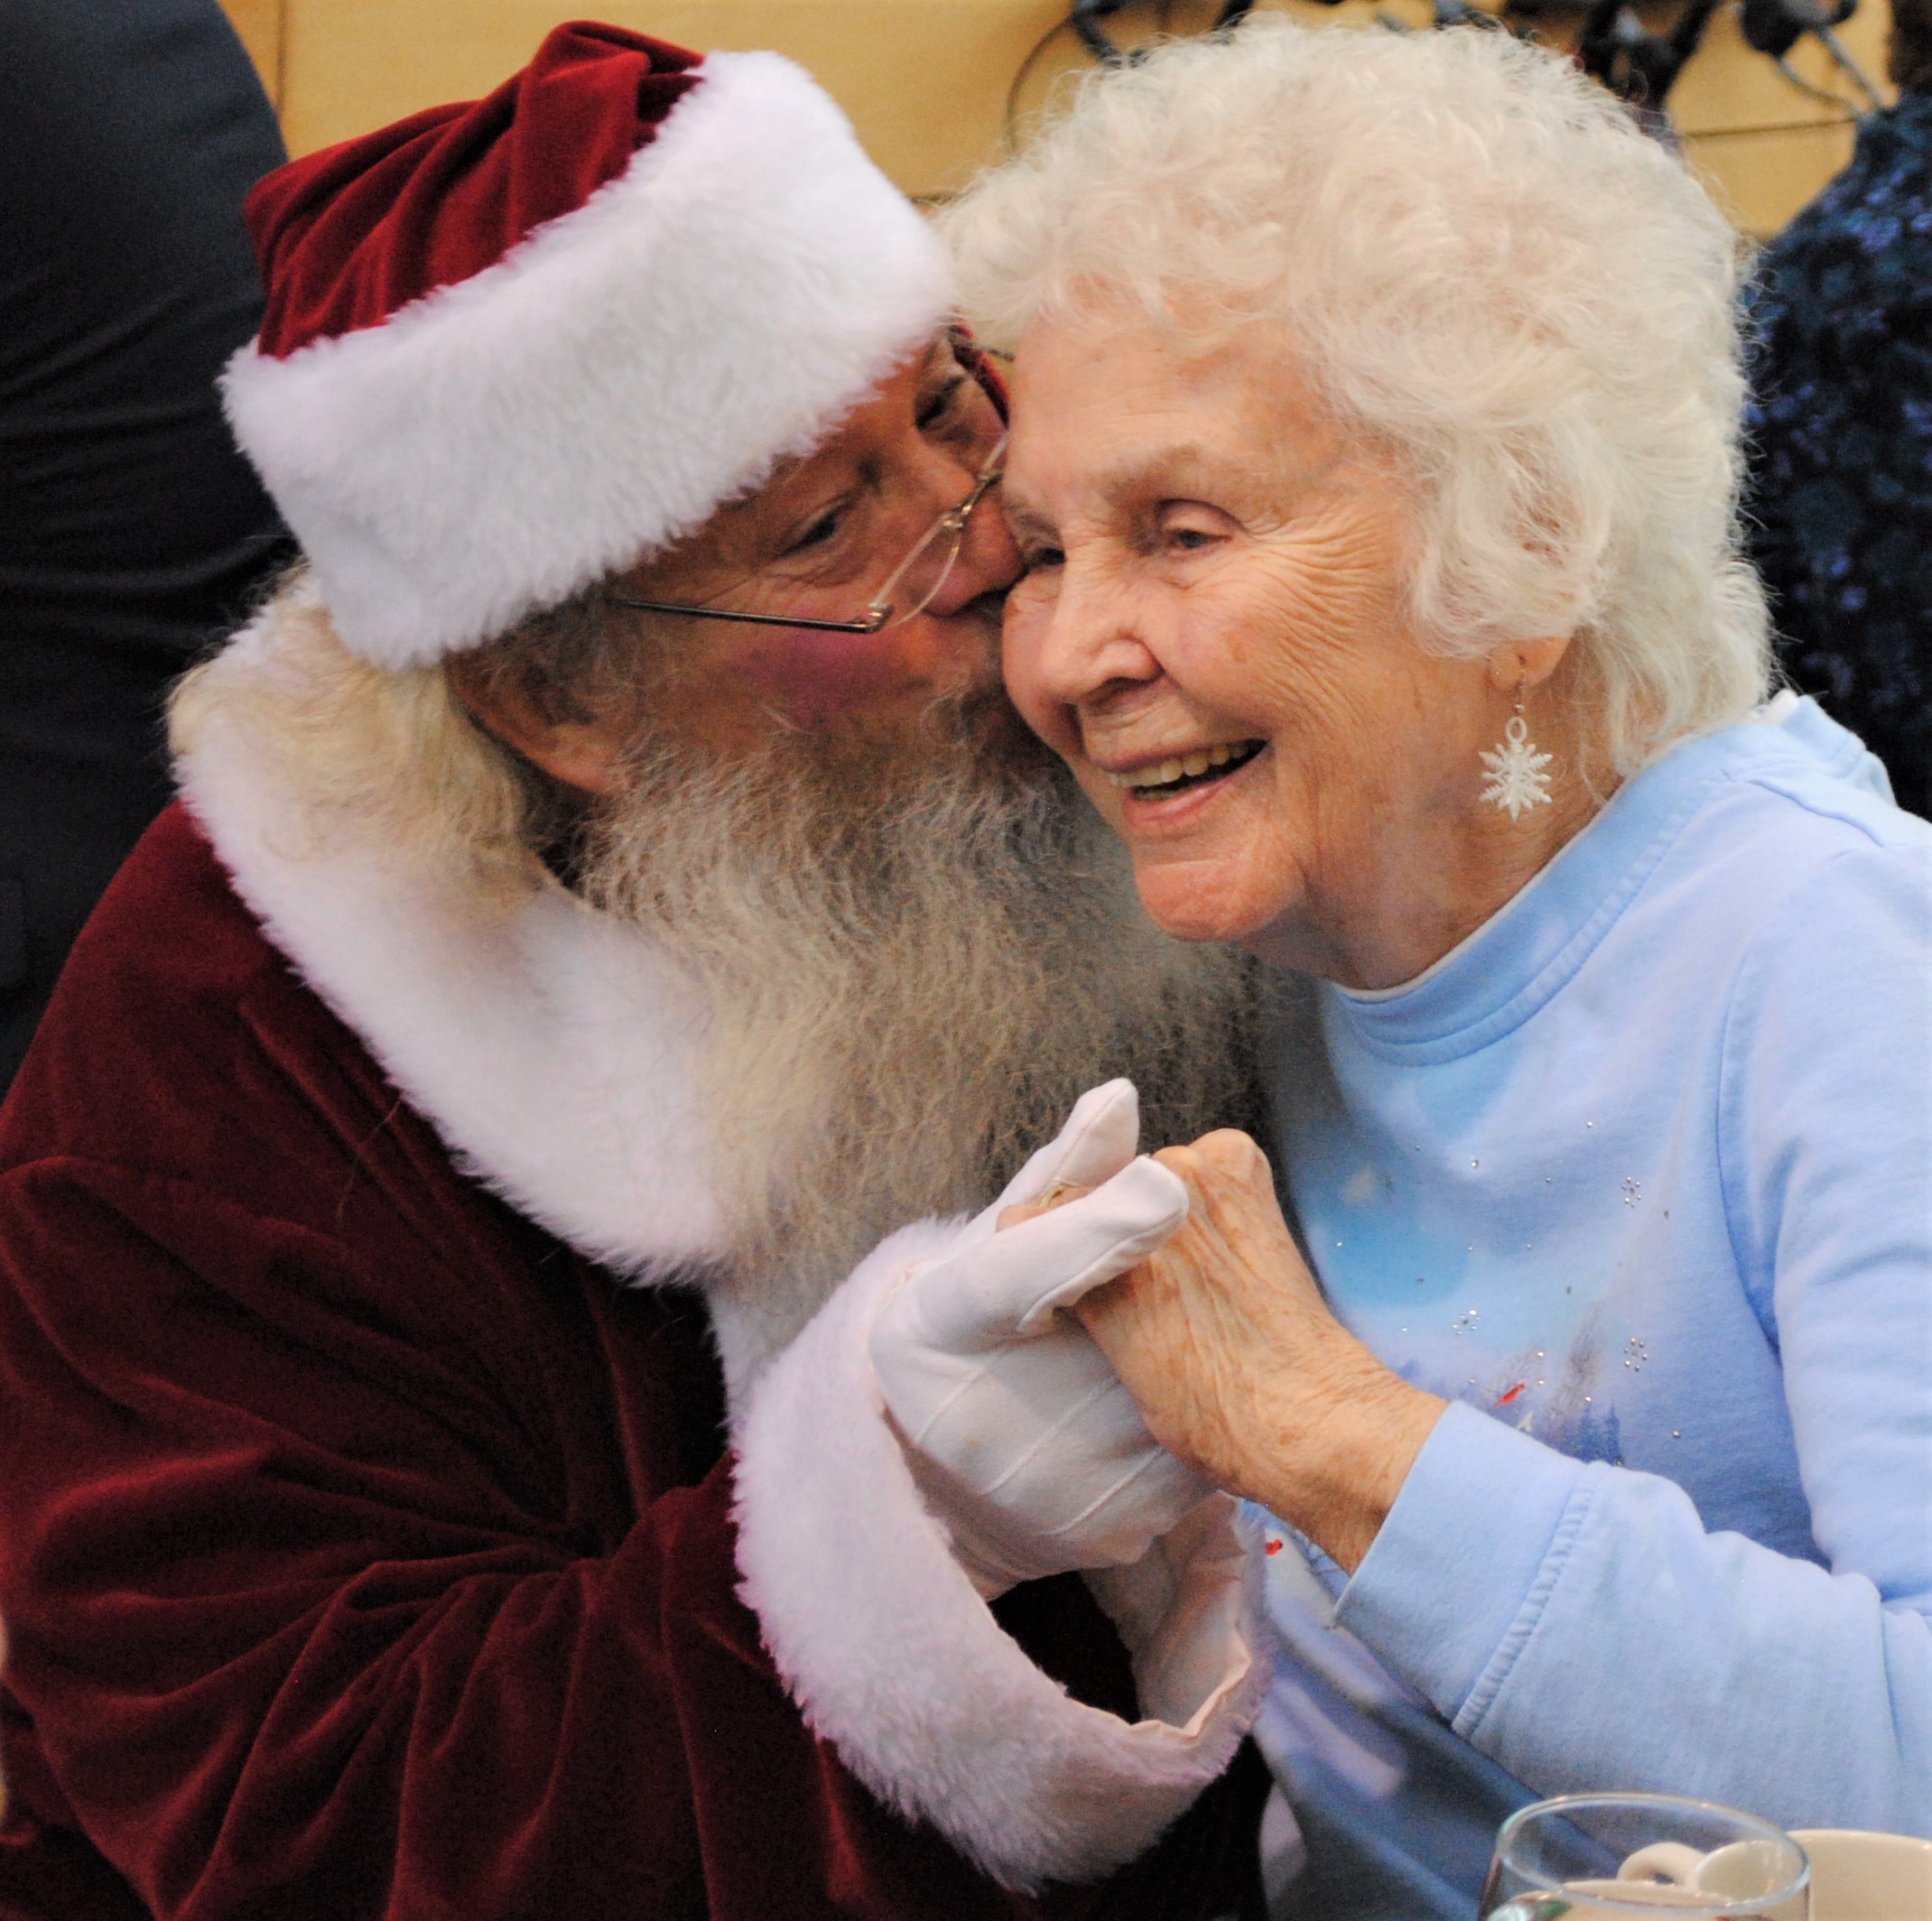 Millie Solon got a gift few received, a smooch from Santa. He told her to not tell Mrs. Claus. Photo by Shelby Tankersley. 